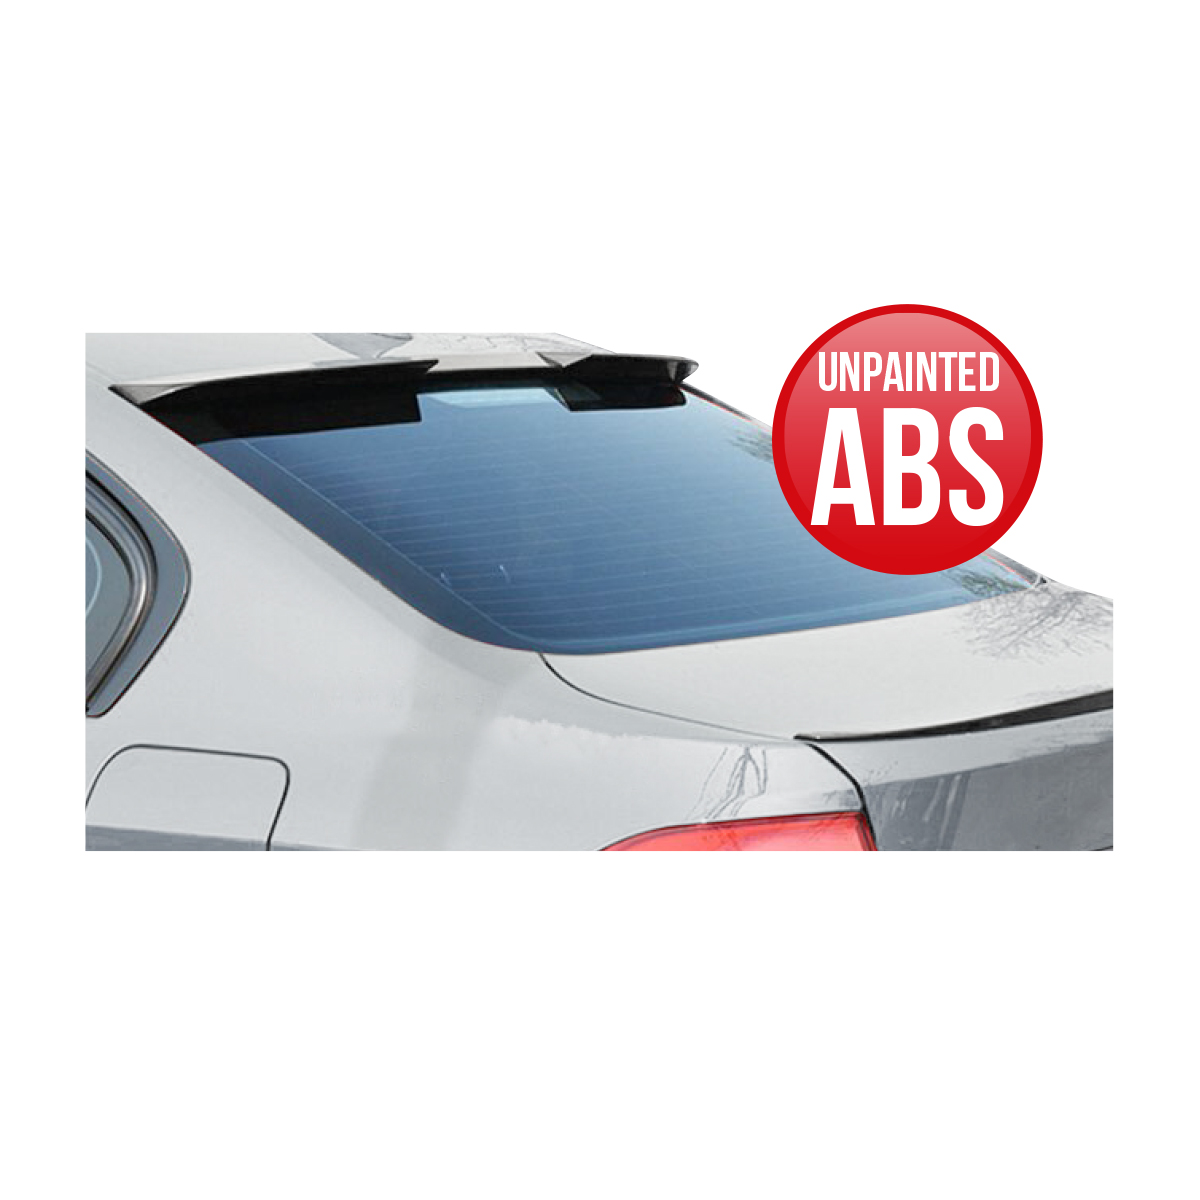 BMW F30 C74 USA STYLE ROOF SPOILER ABS UNPAINTED-BMWF30ABSR74